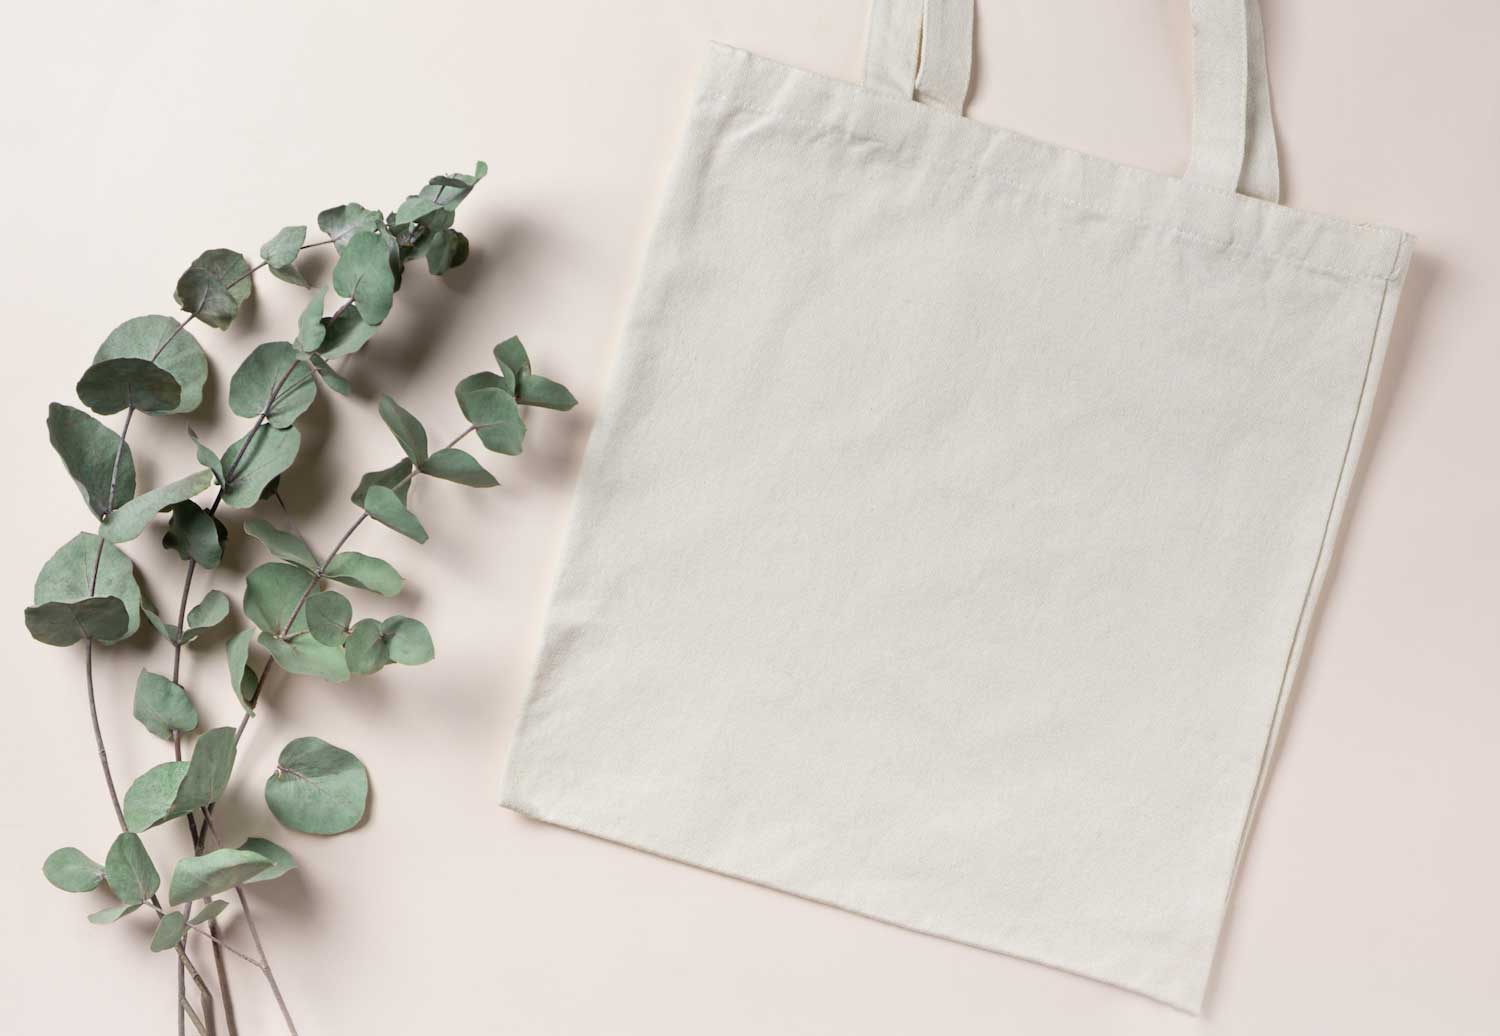 A canvas tote bag laying flat on a table with a plant stem next to it.